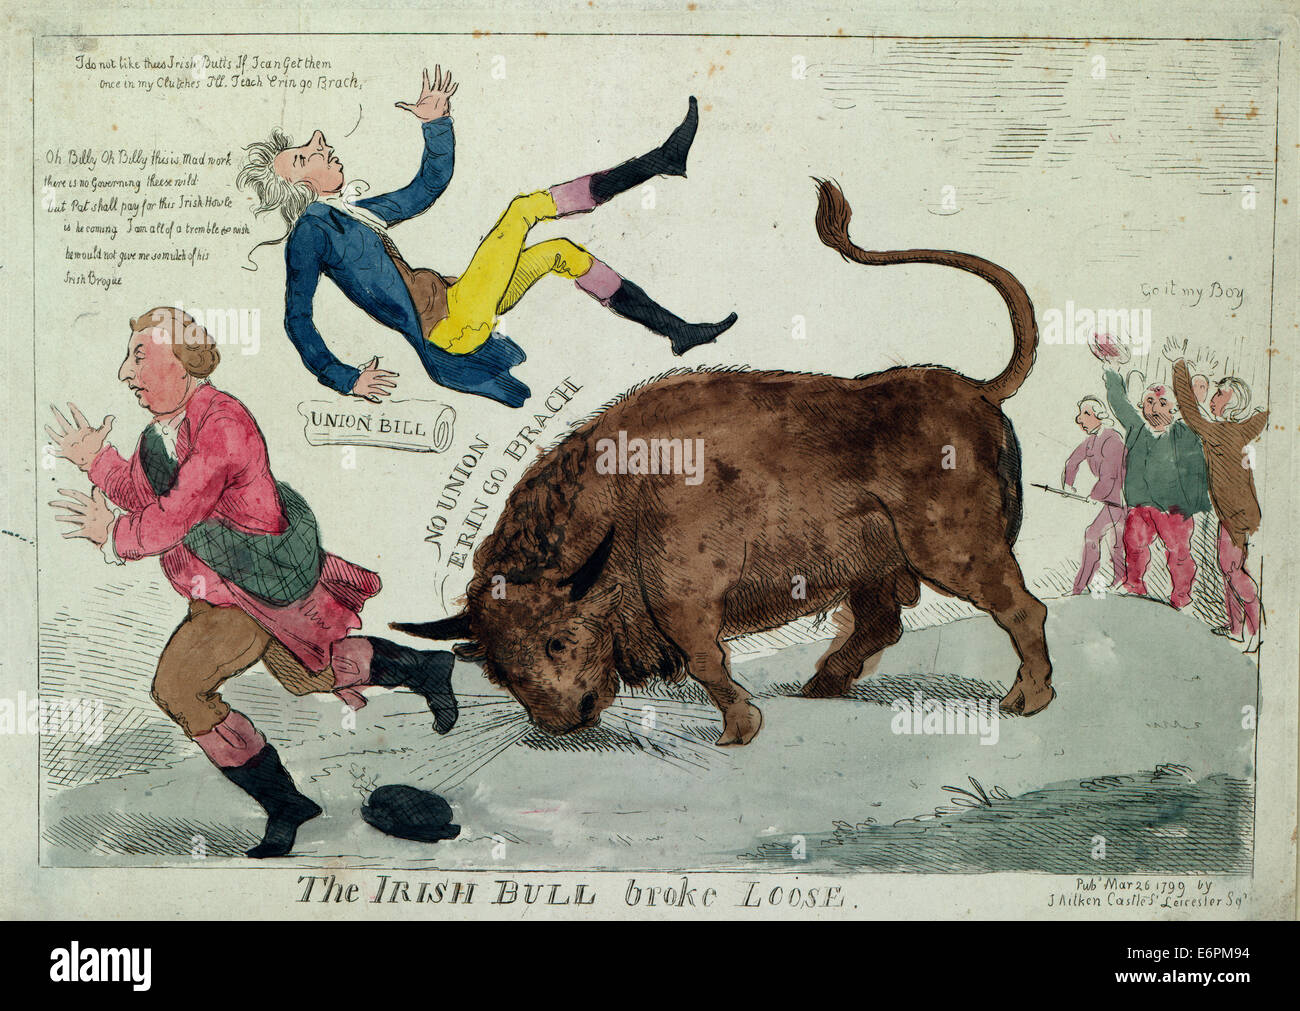 The Irish bull broke loose - Summary: Print shows the 'Irish Bull' tossing William Pitt into the air and about to do the same to Lord Dundas who runs to the left; on the far right, those opposed to Pitt's 'Union Bill' cheer on the bull, 'Go it my Boy.' Political Cartoon, 1799 Stock Photo